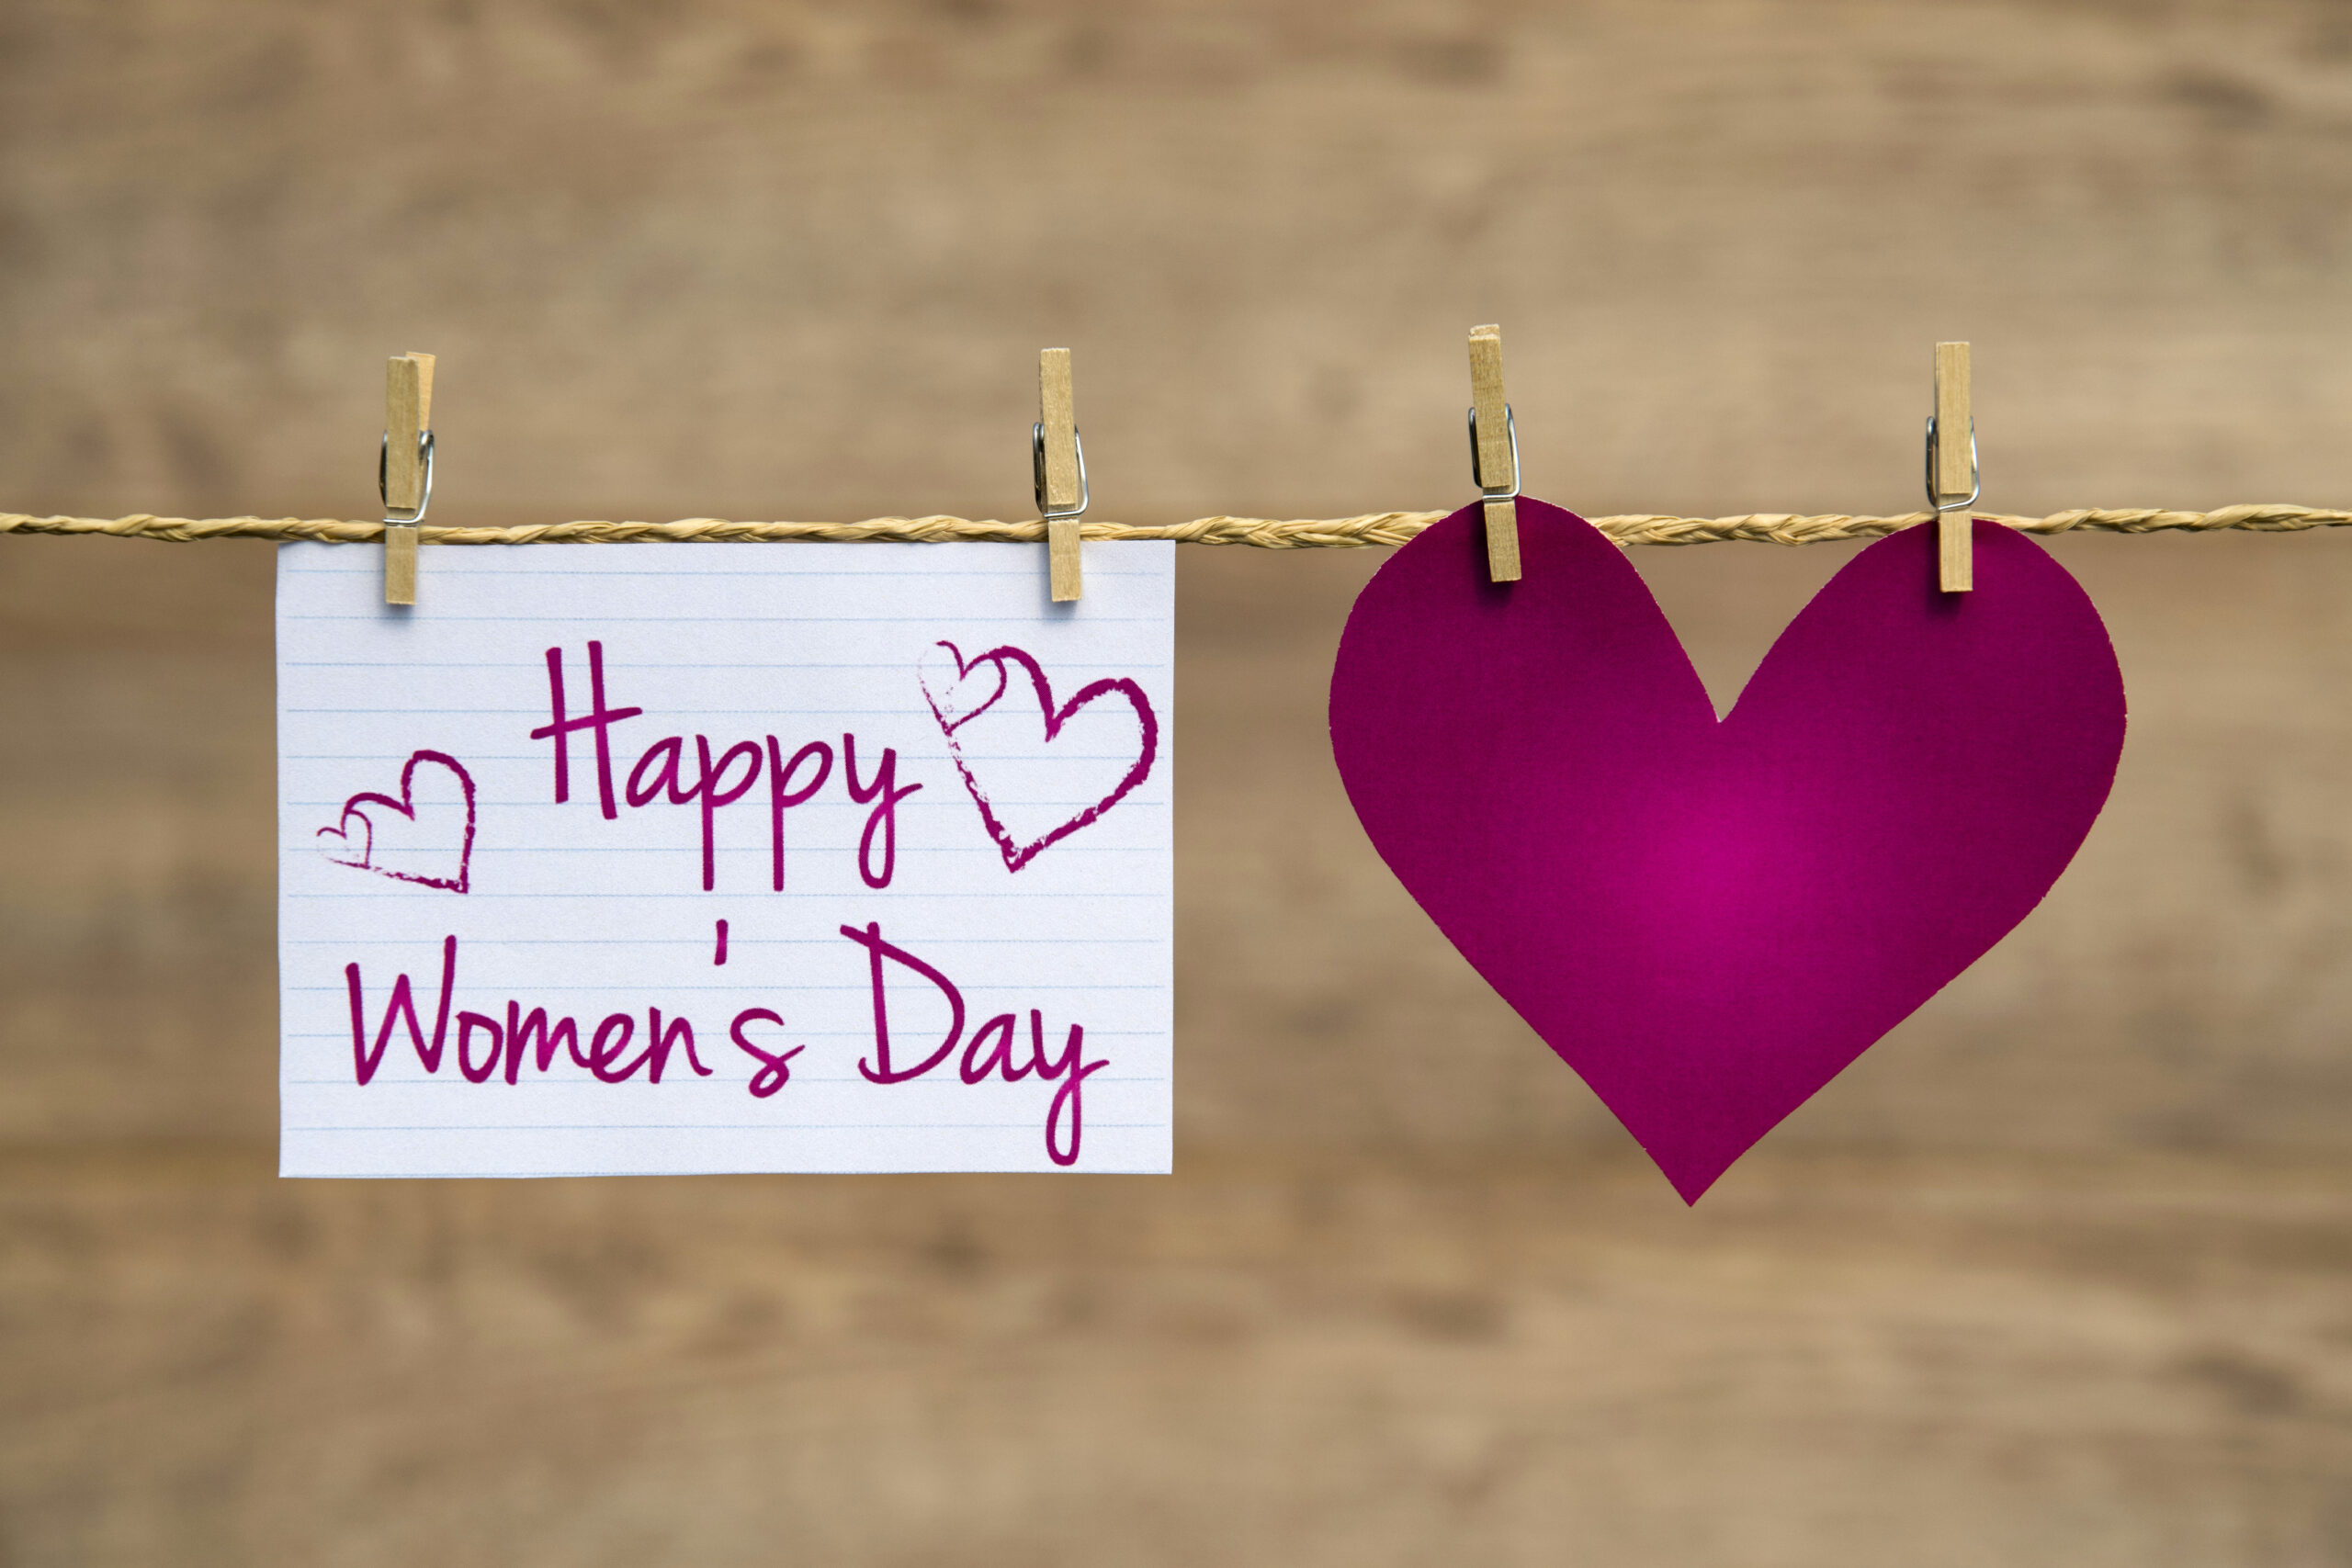 Women’s,Day,Card,Or,Background.